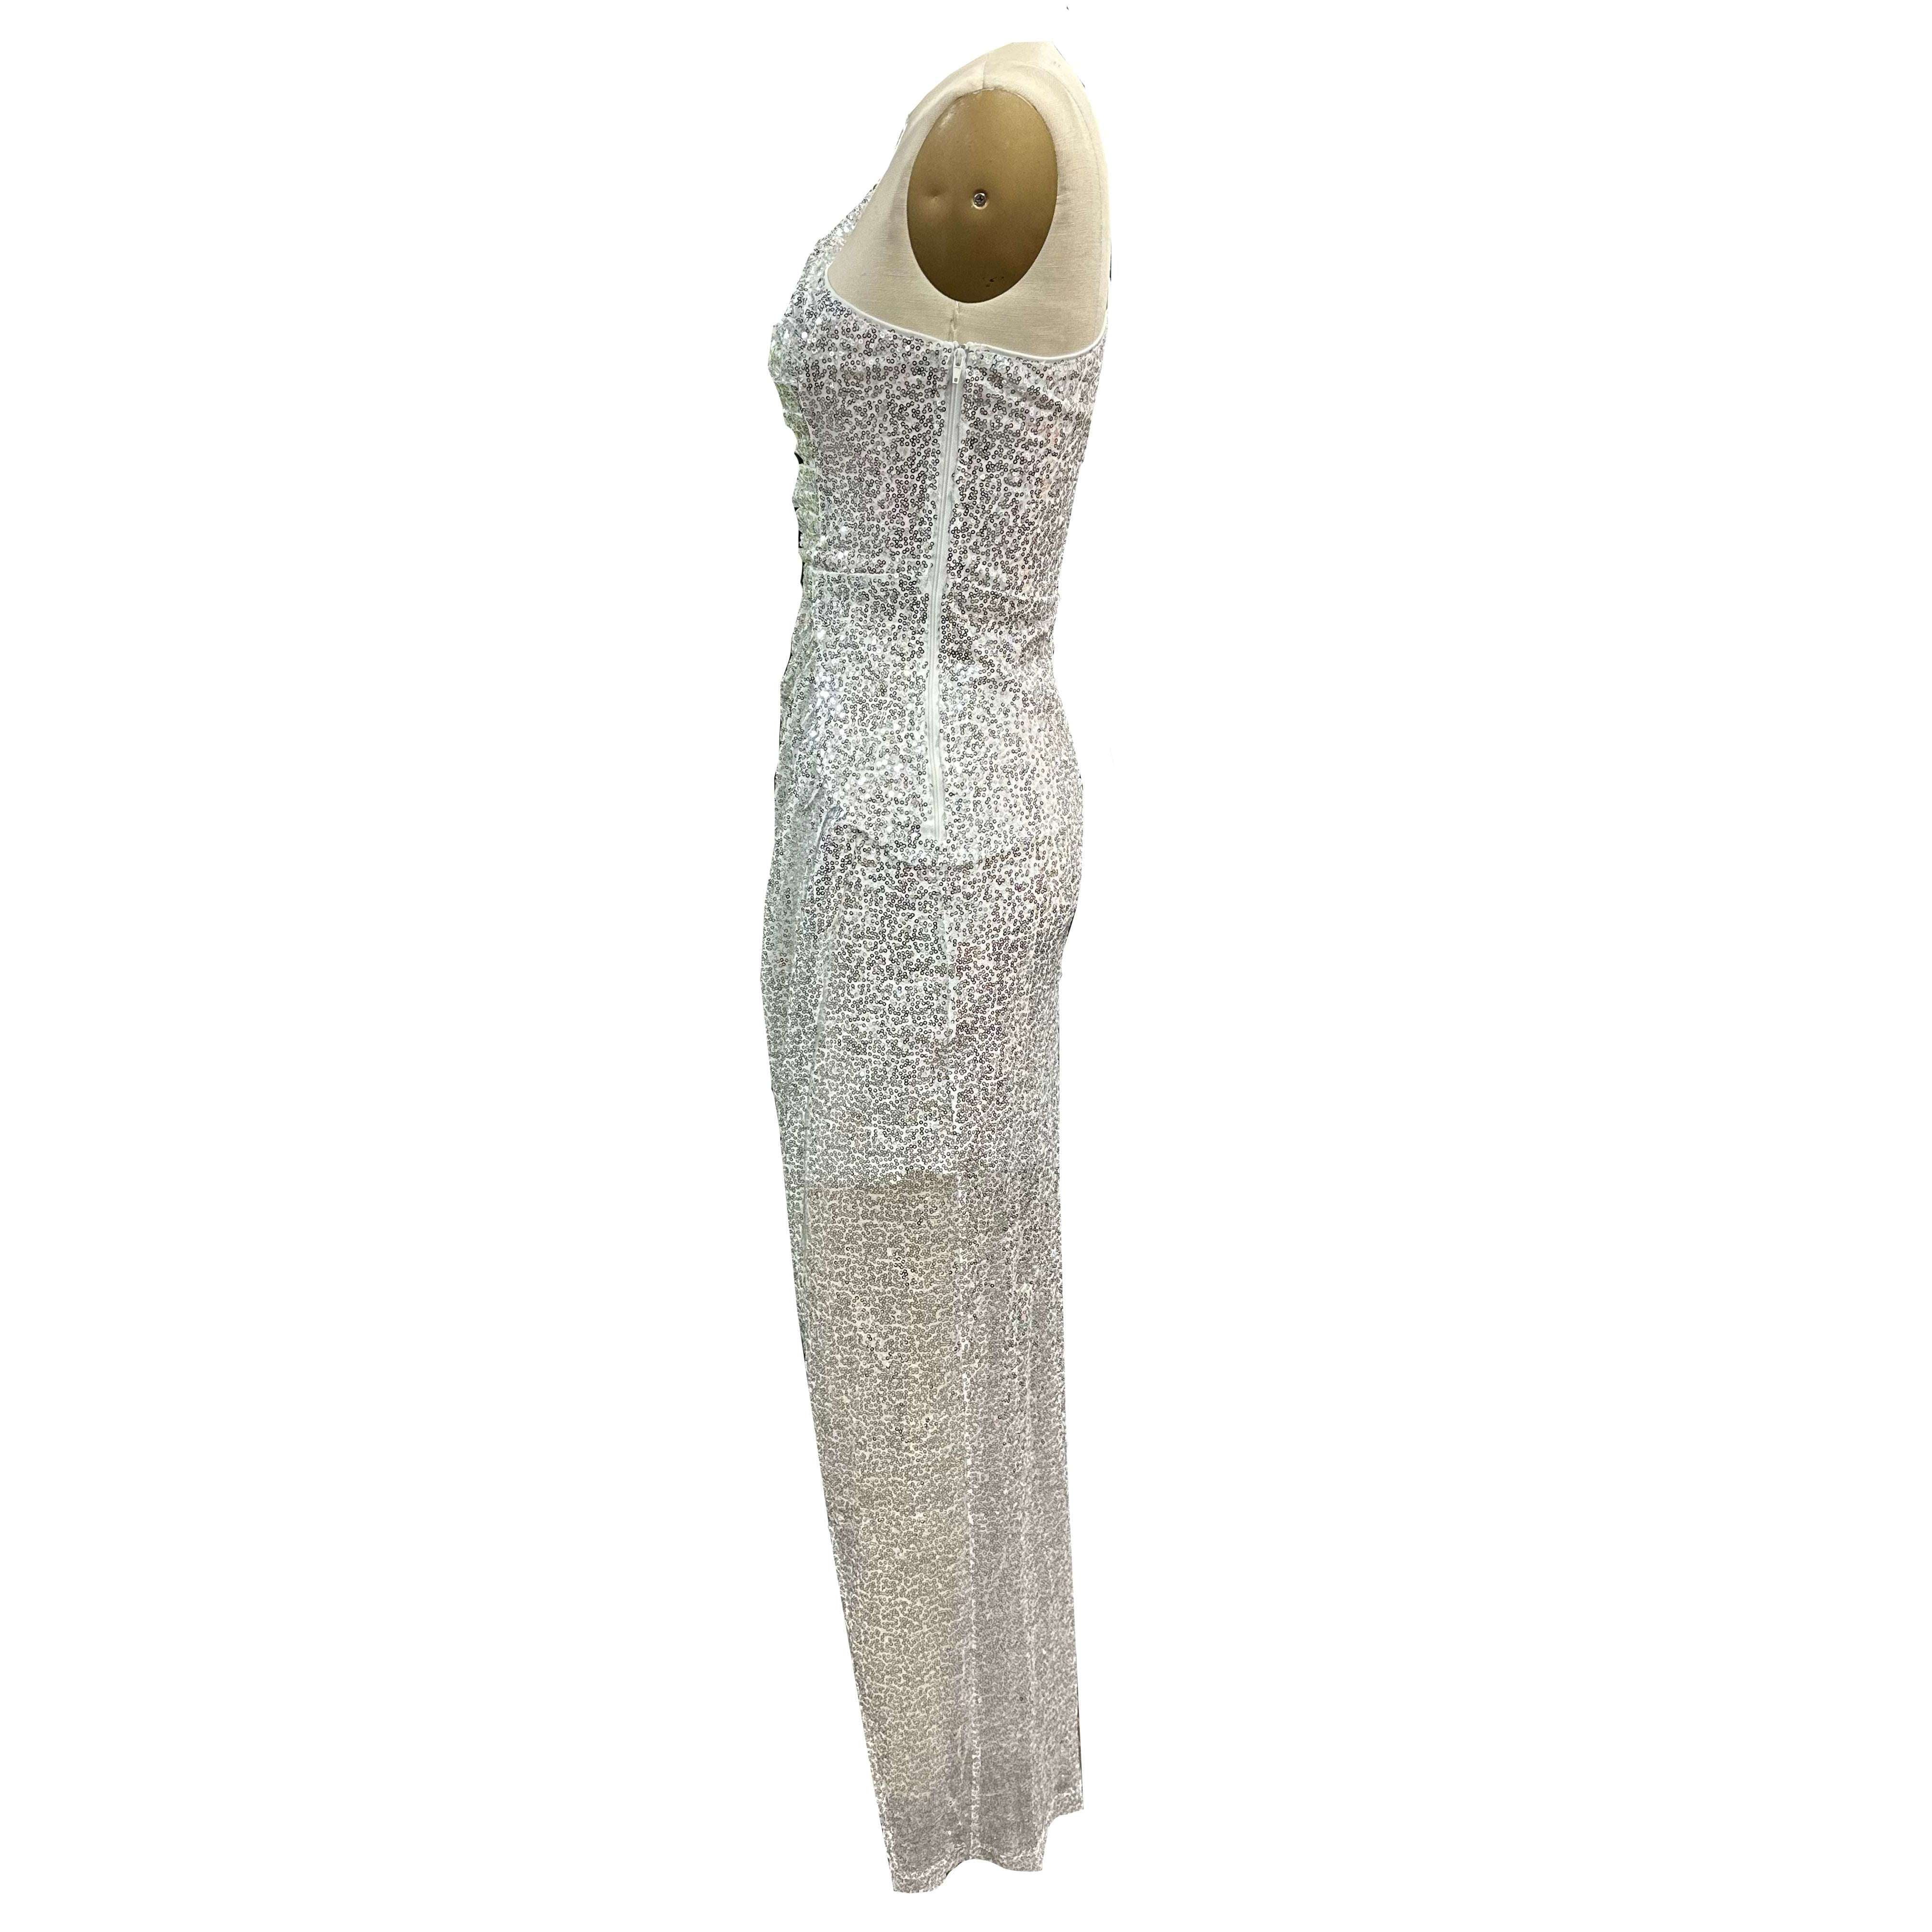 1970’s Disco Darling Silver Dress Adult Costume